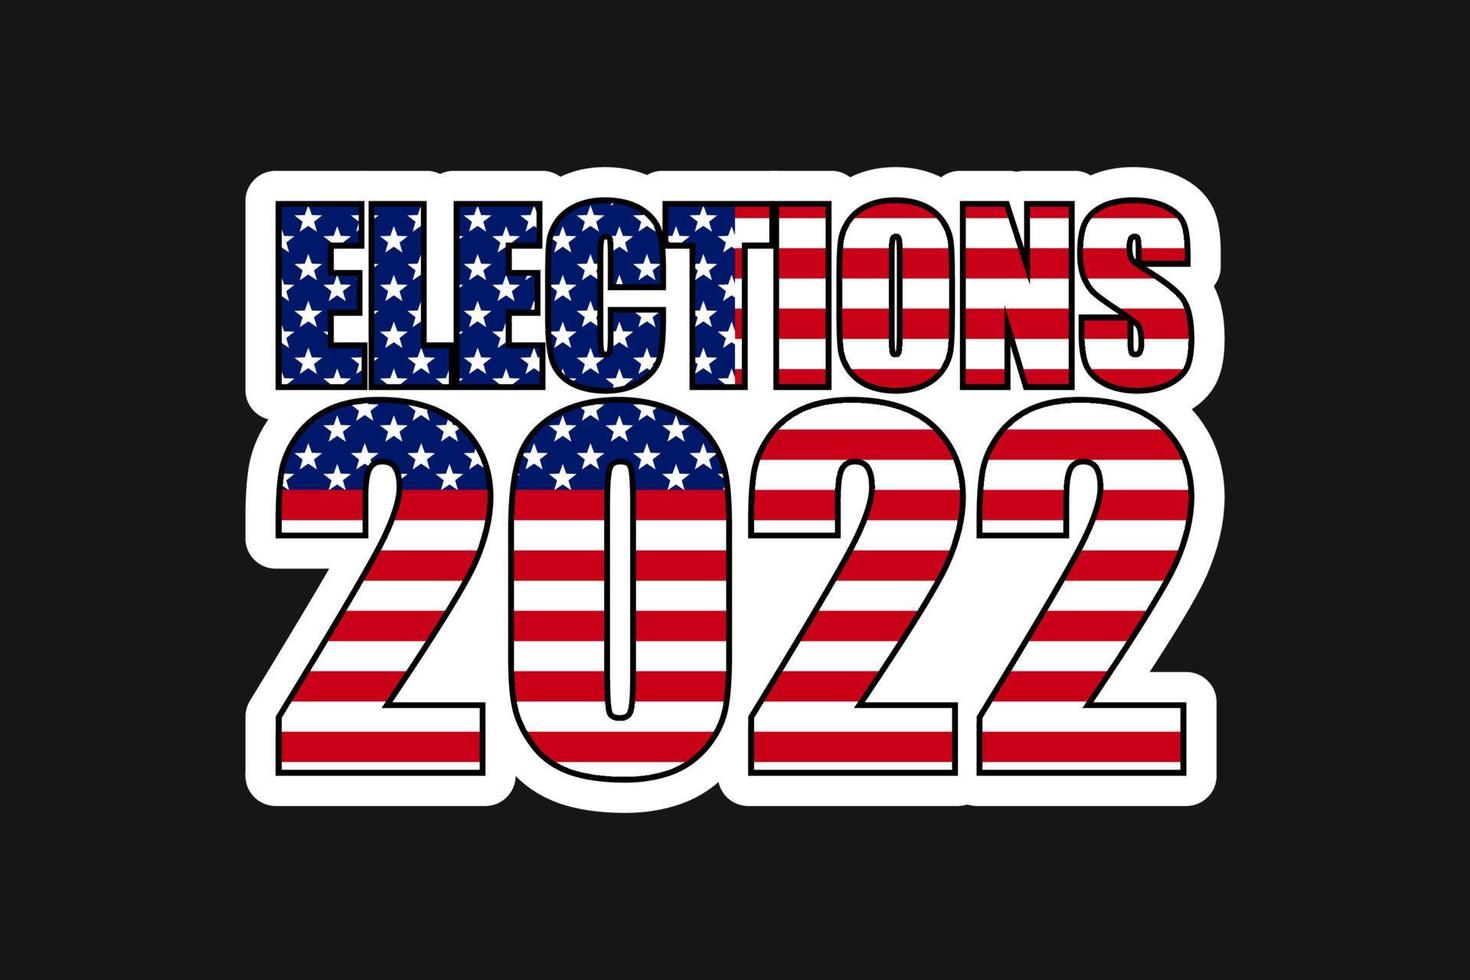 american elections 2022 vote vector illustration. collection of badge patch stickers with democratic civil society slogans, stars and stripes flag elements. design for advertising printing